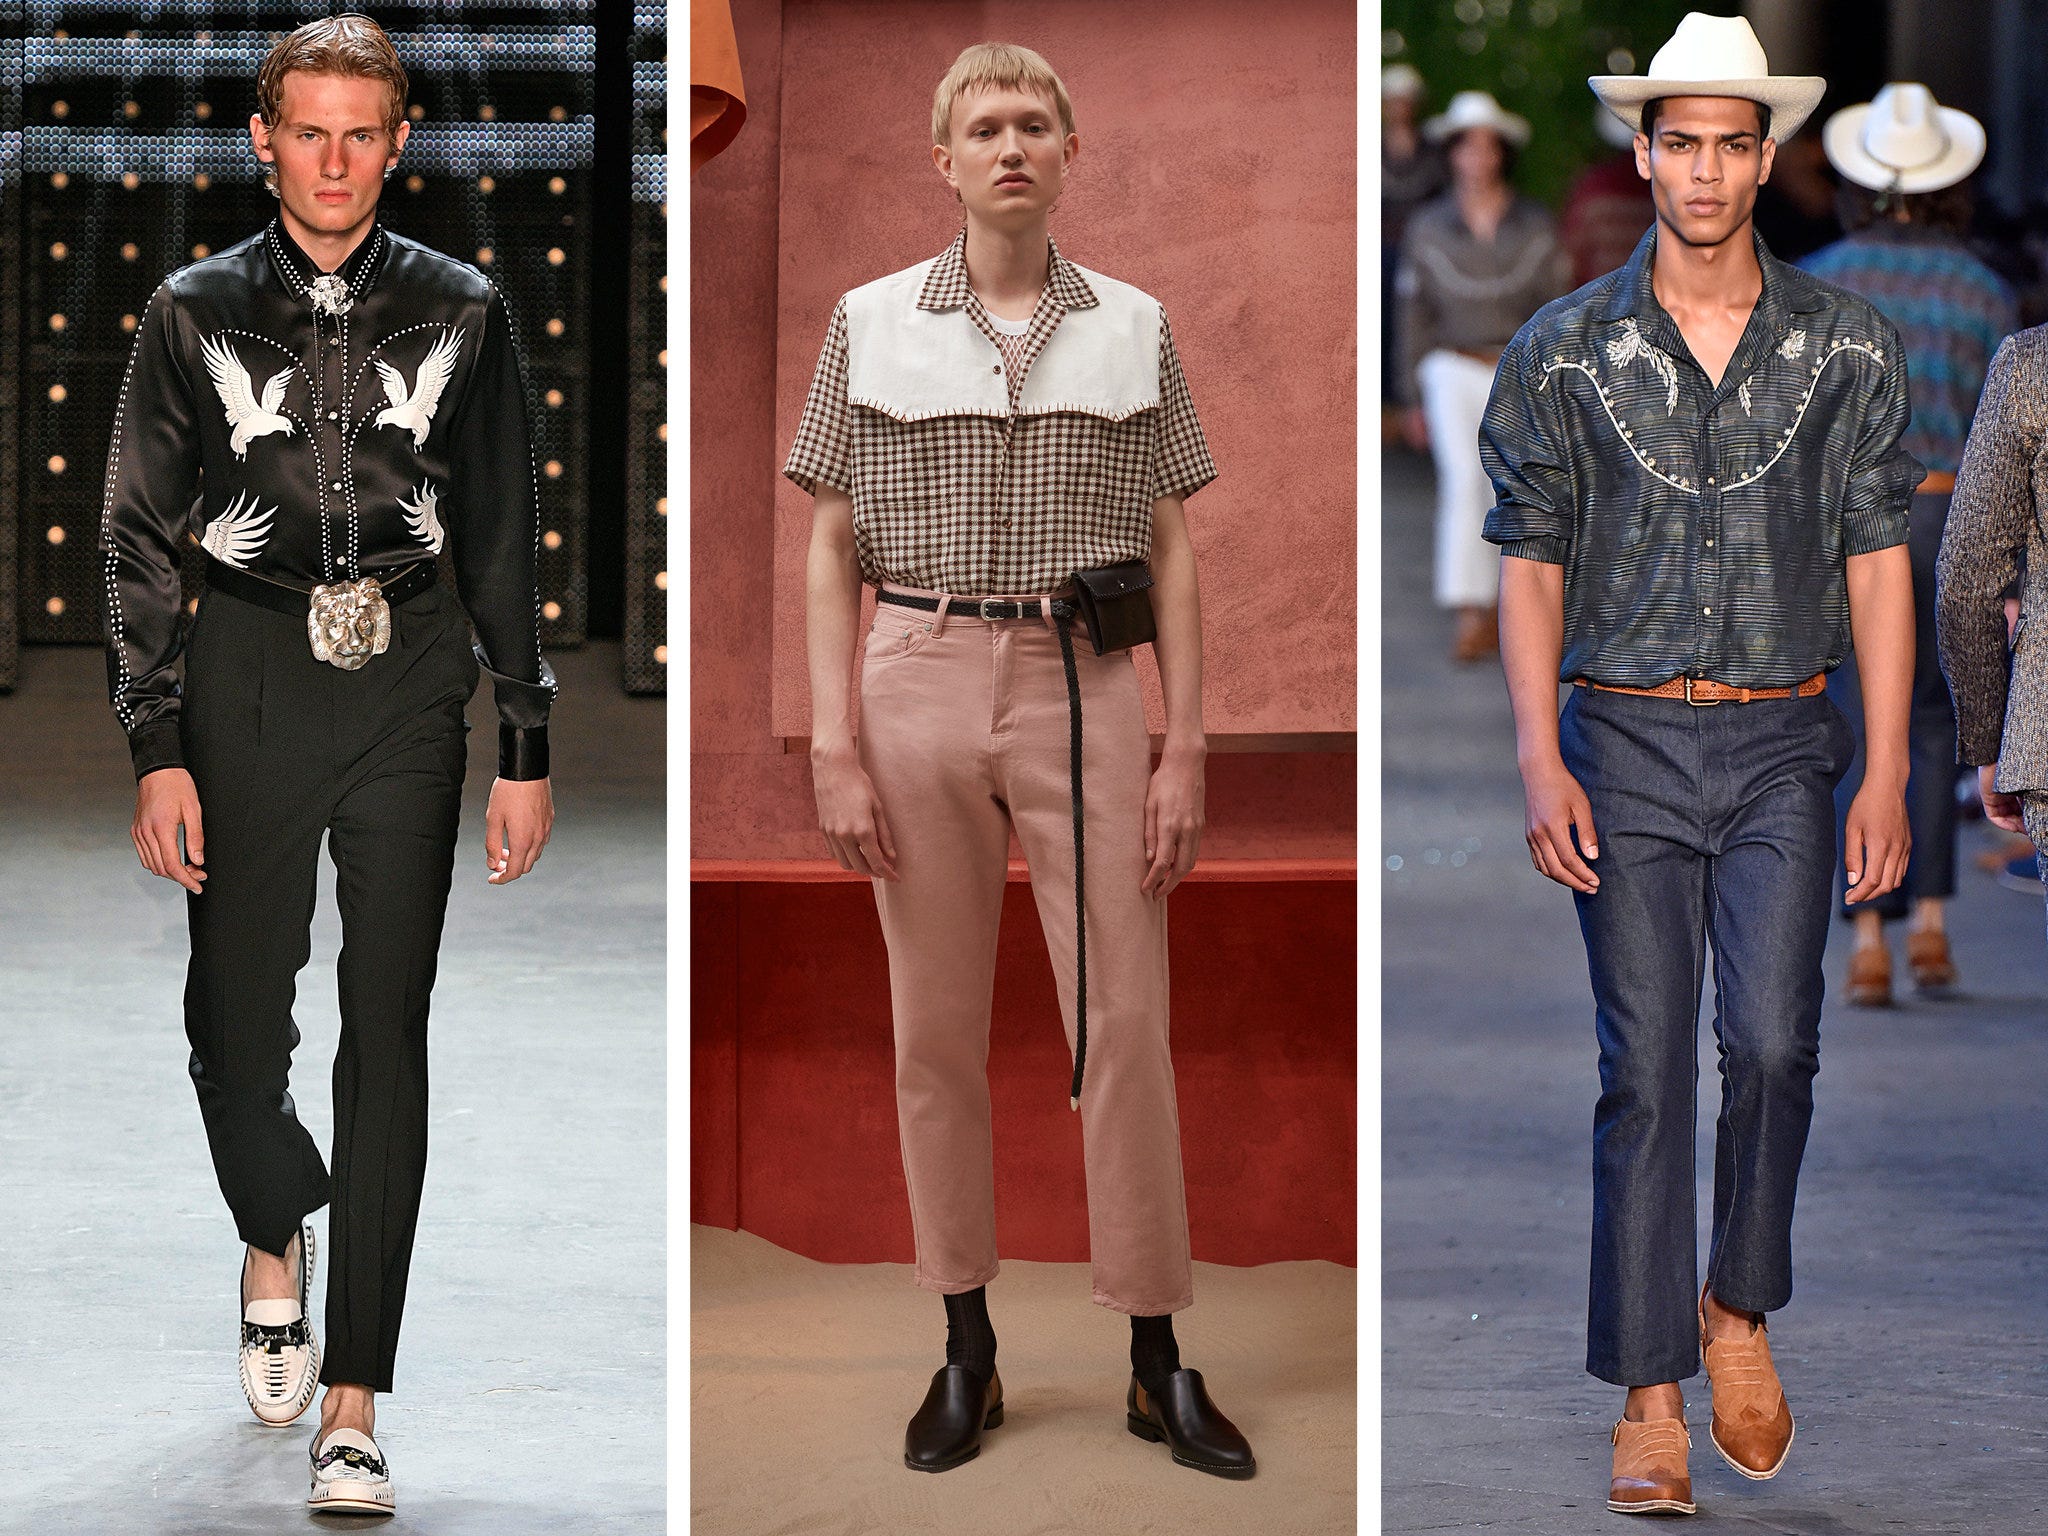 Co-ords - the menswear trend we're avoiding this year